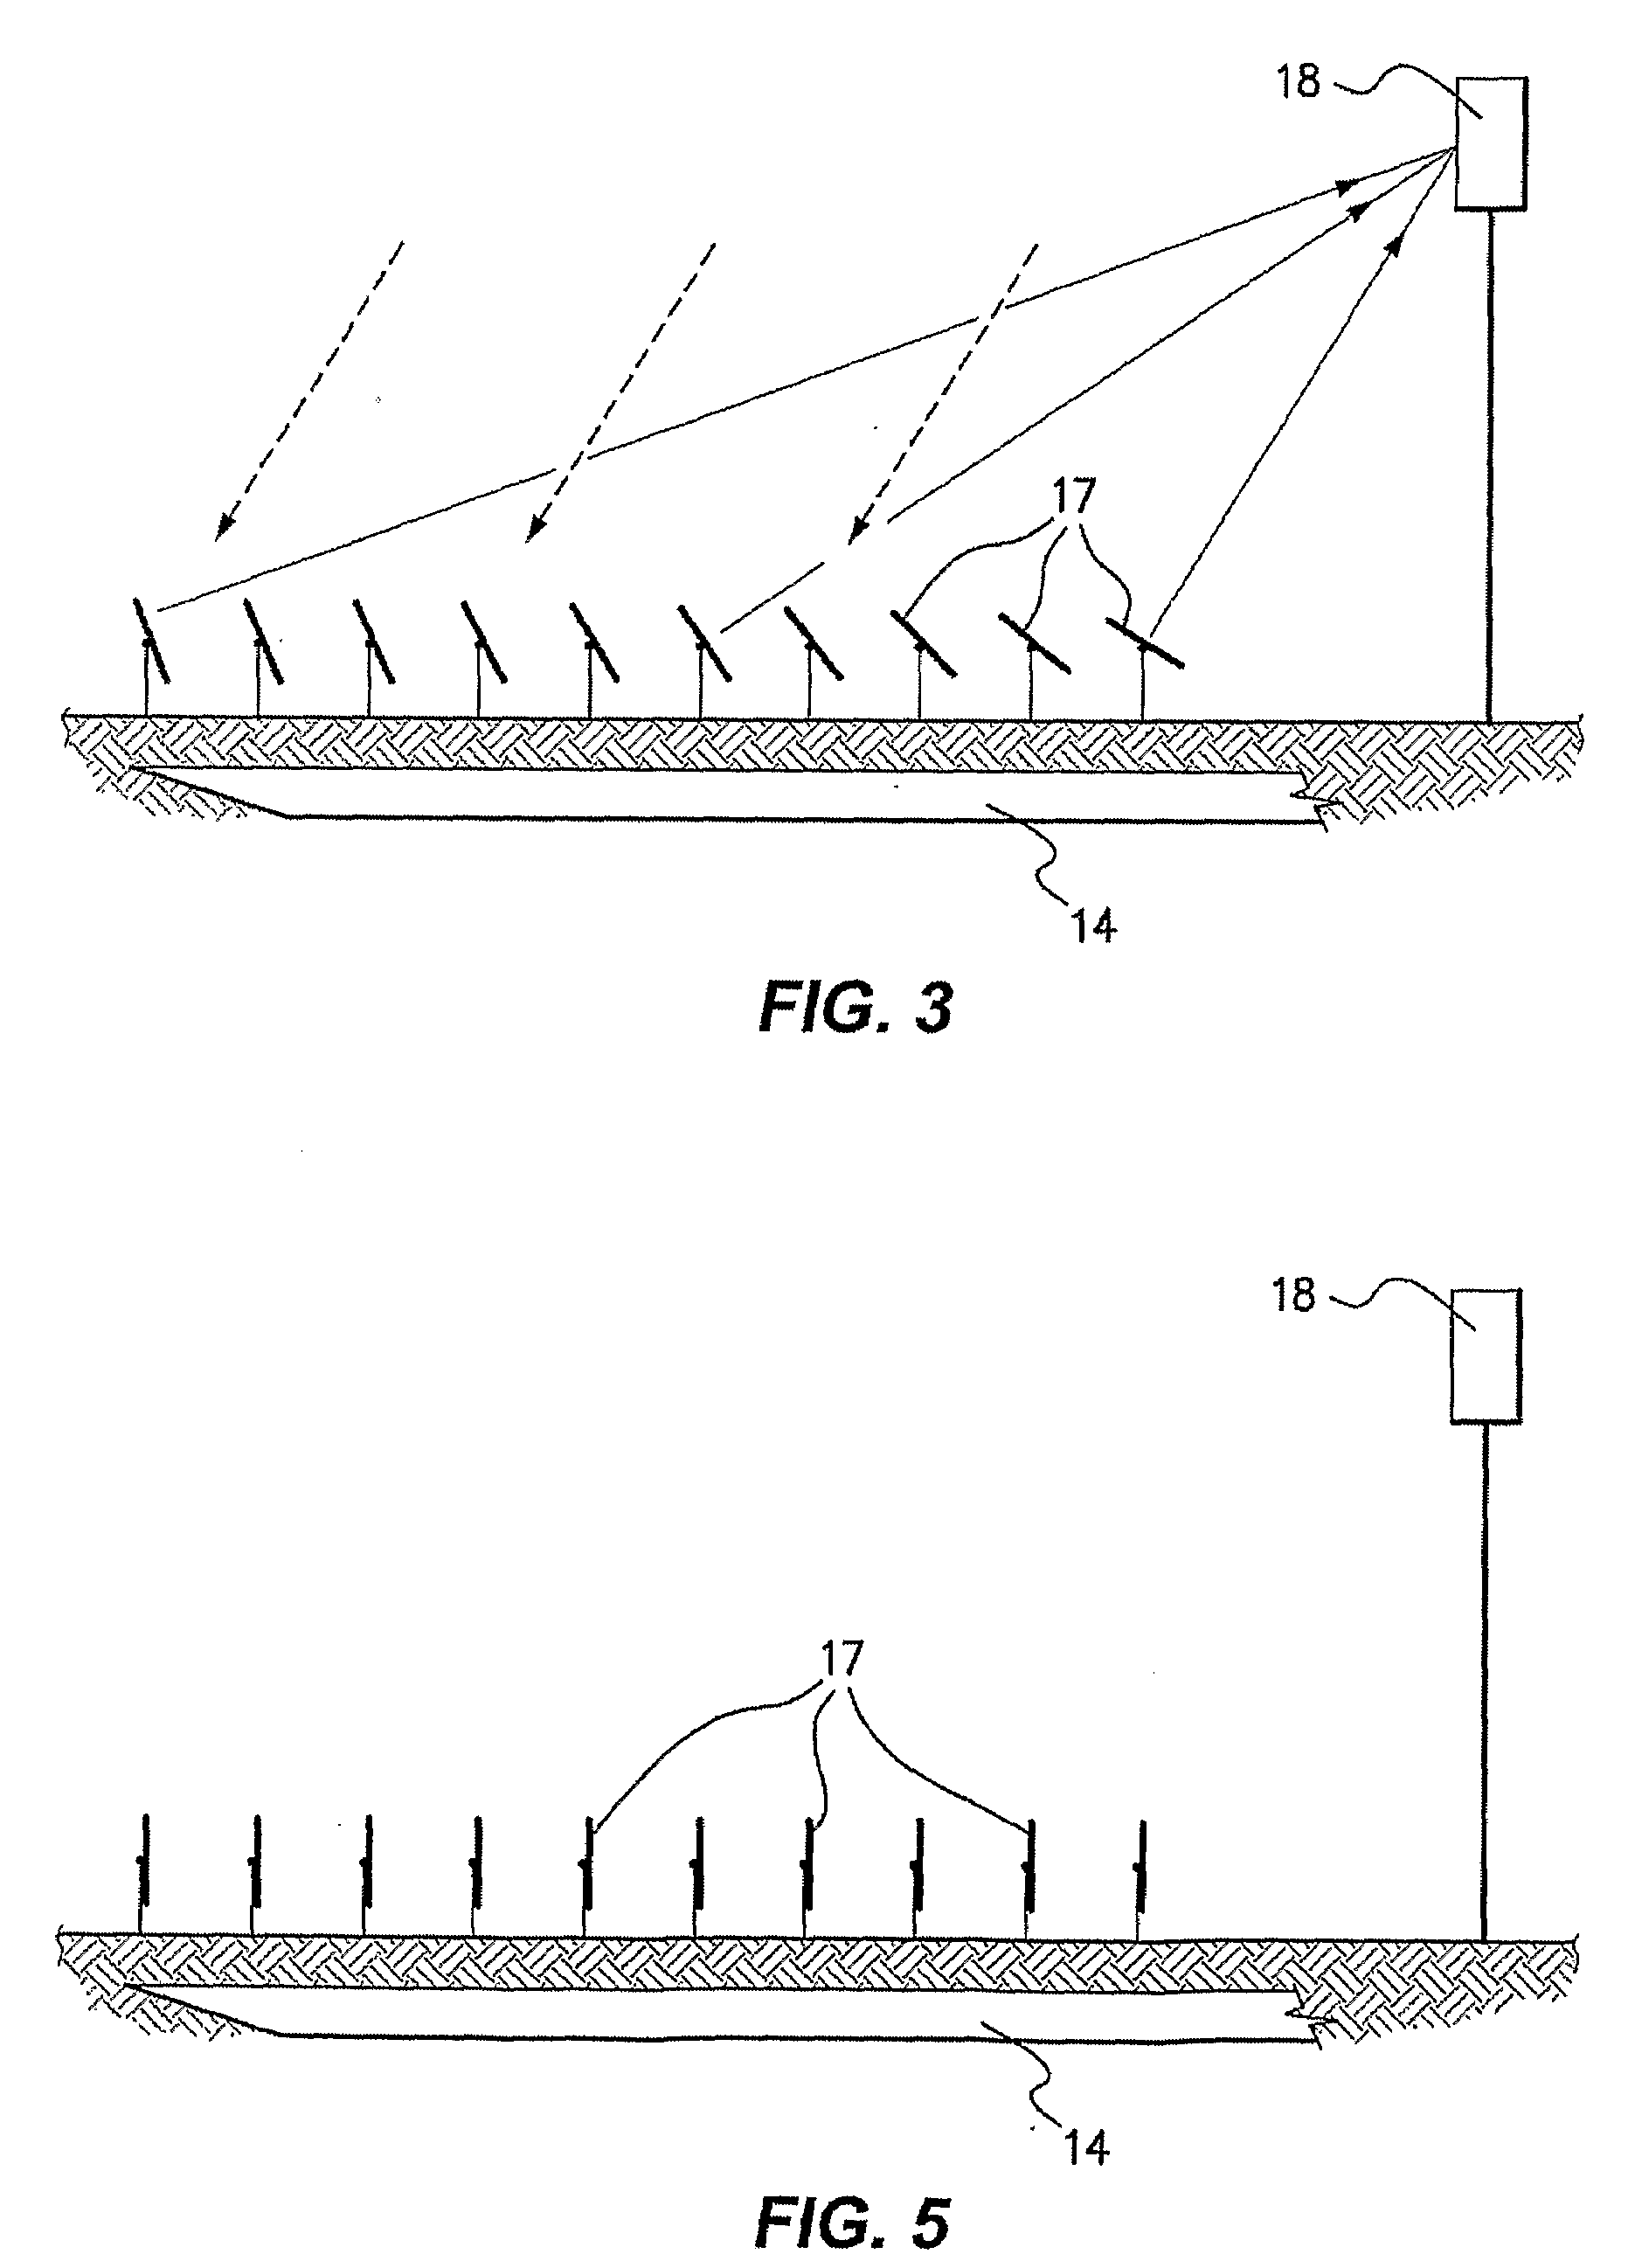 Thermal power plant incorporating subterranean cooling of condenser coolant